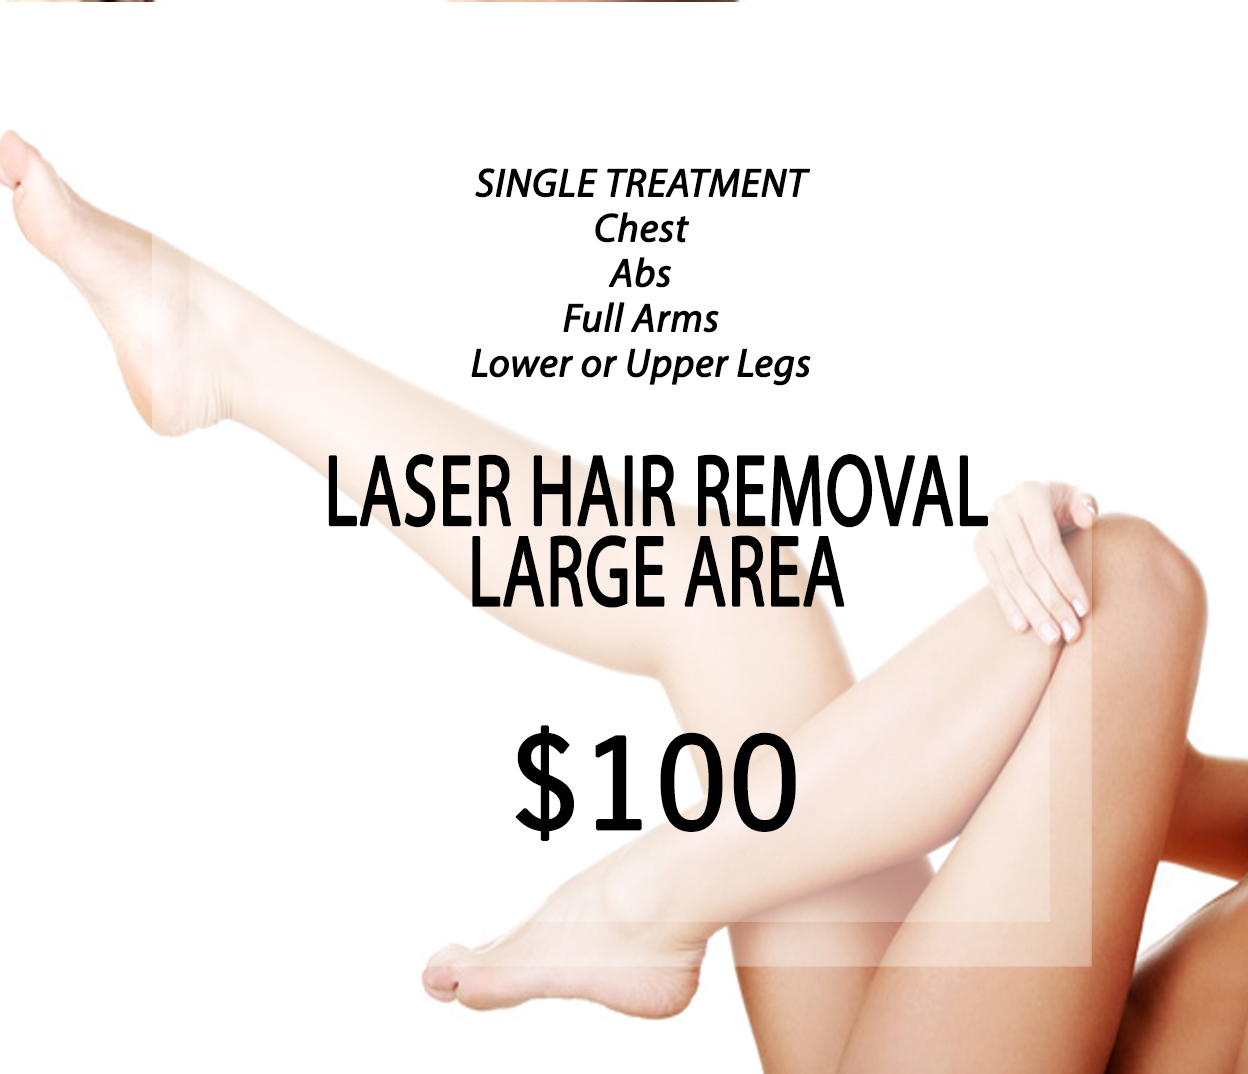 Large Area- Laser Hair Removal | Beauty Lab + Laser